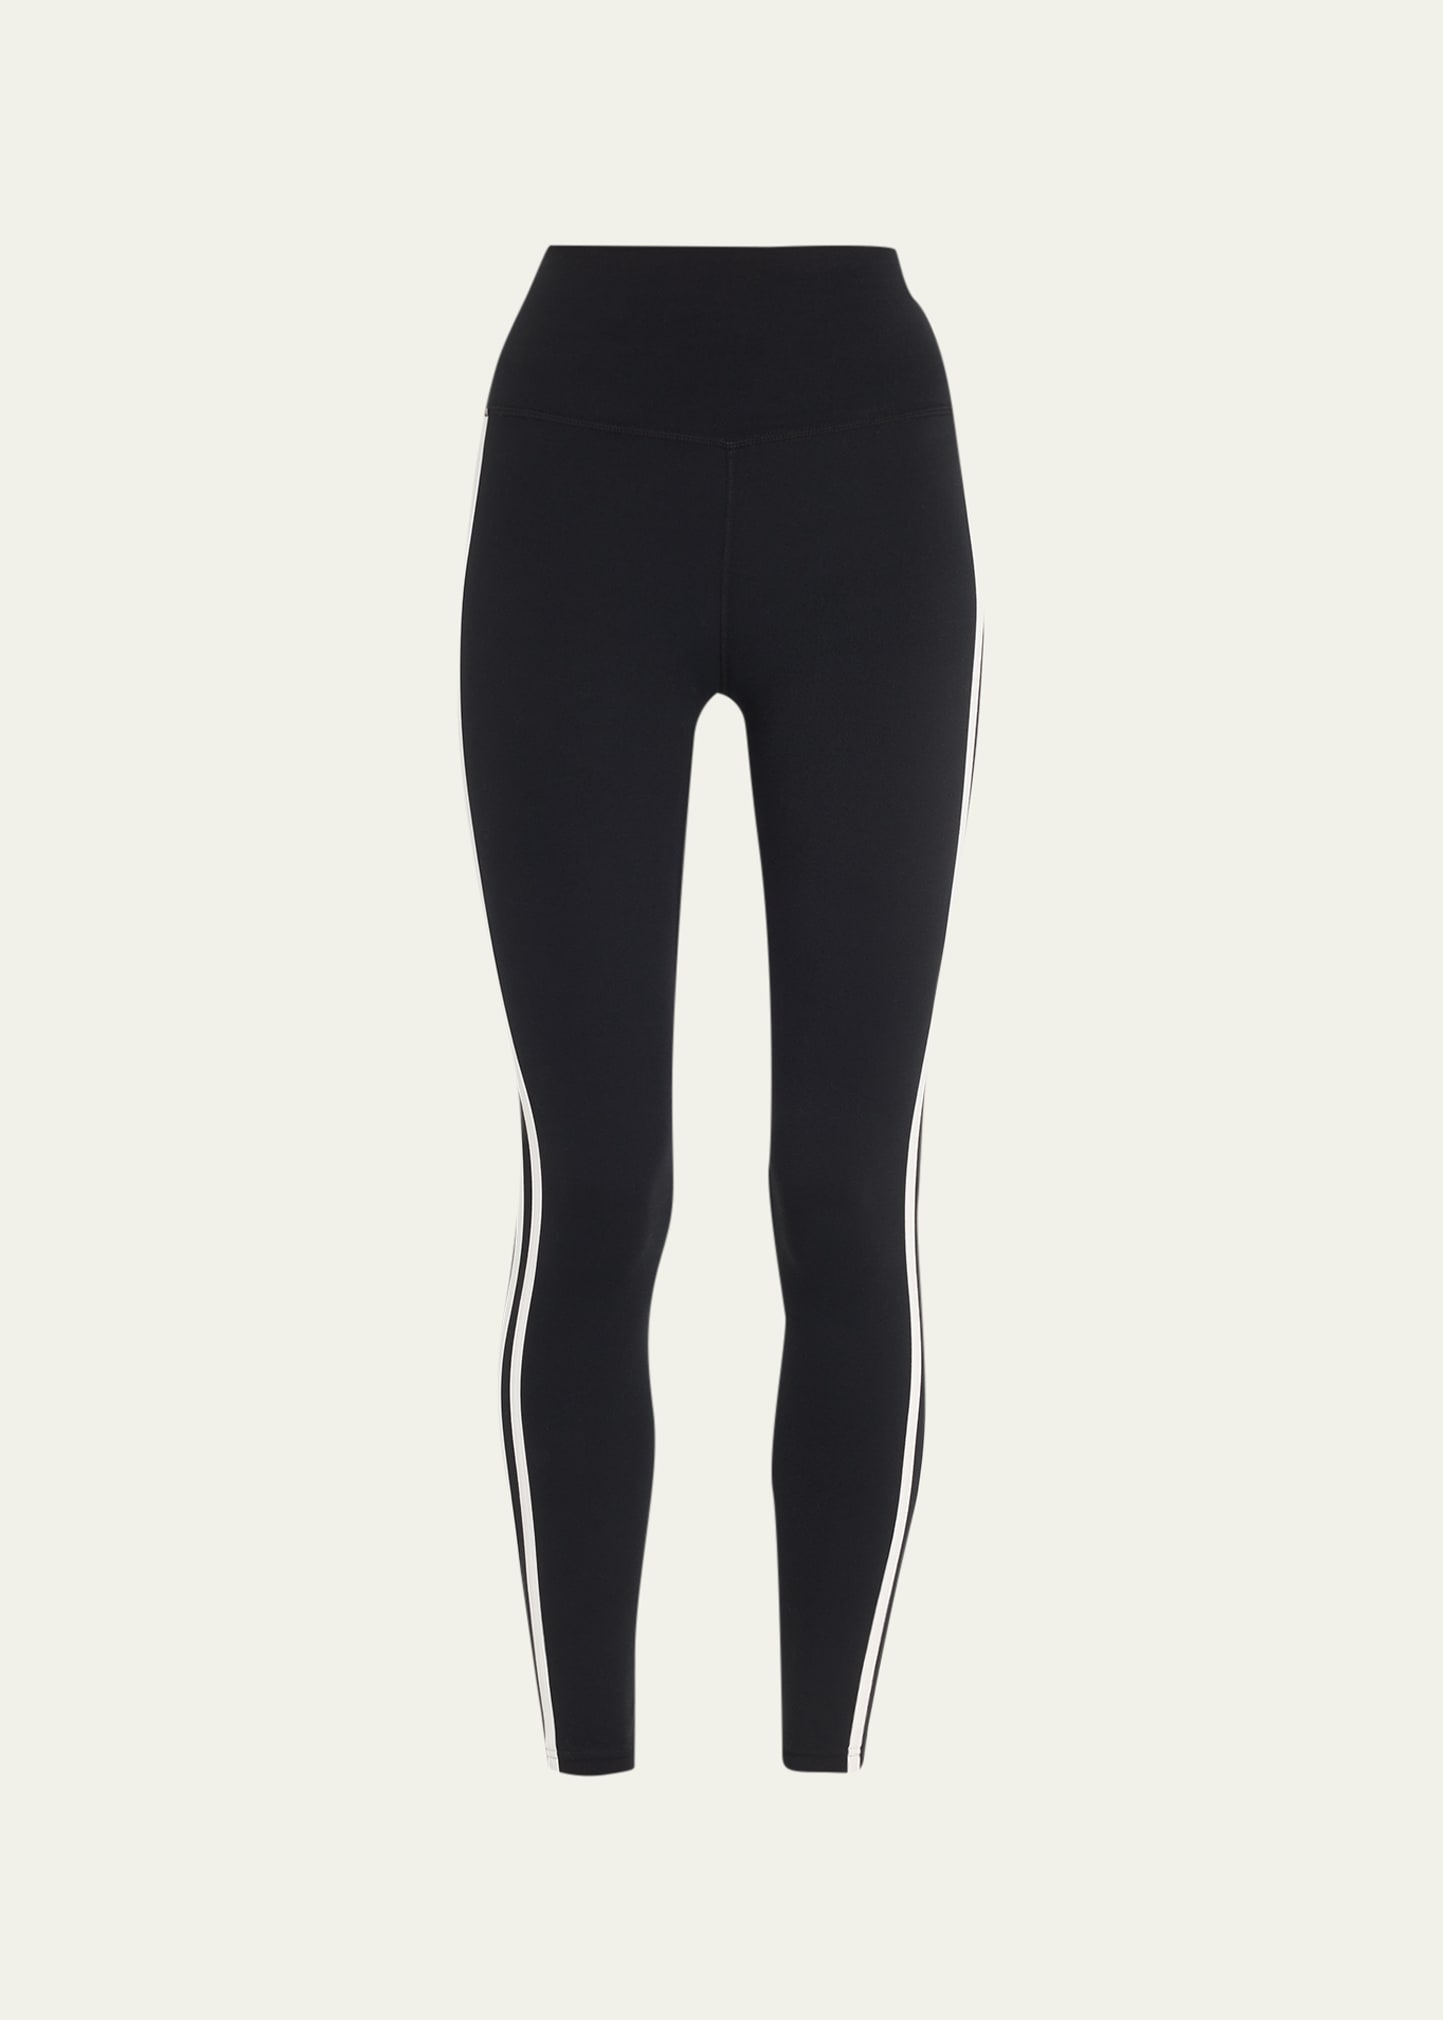 Splits59 Ella High-waisted Airweight 7/8 Legging Pant In Charcoal, Women's At Urban Outfitters